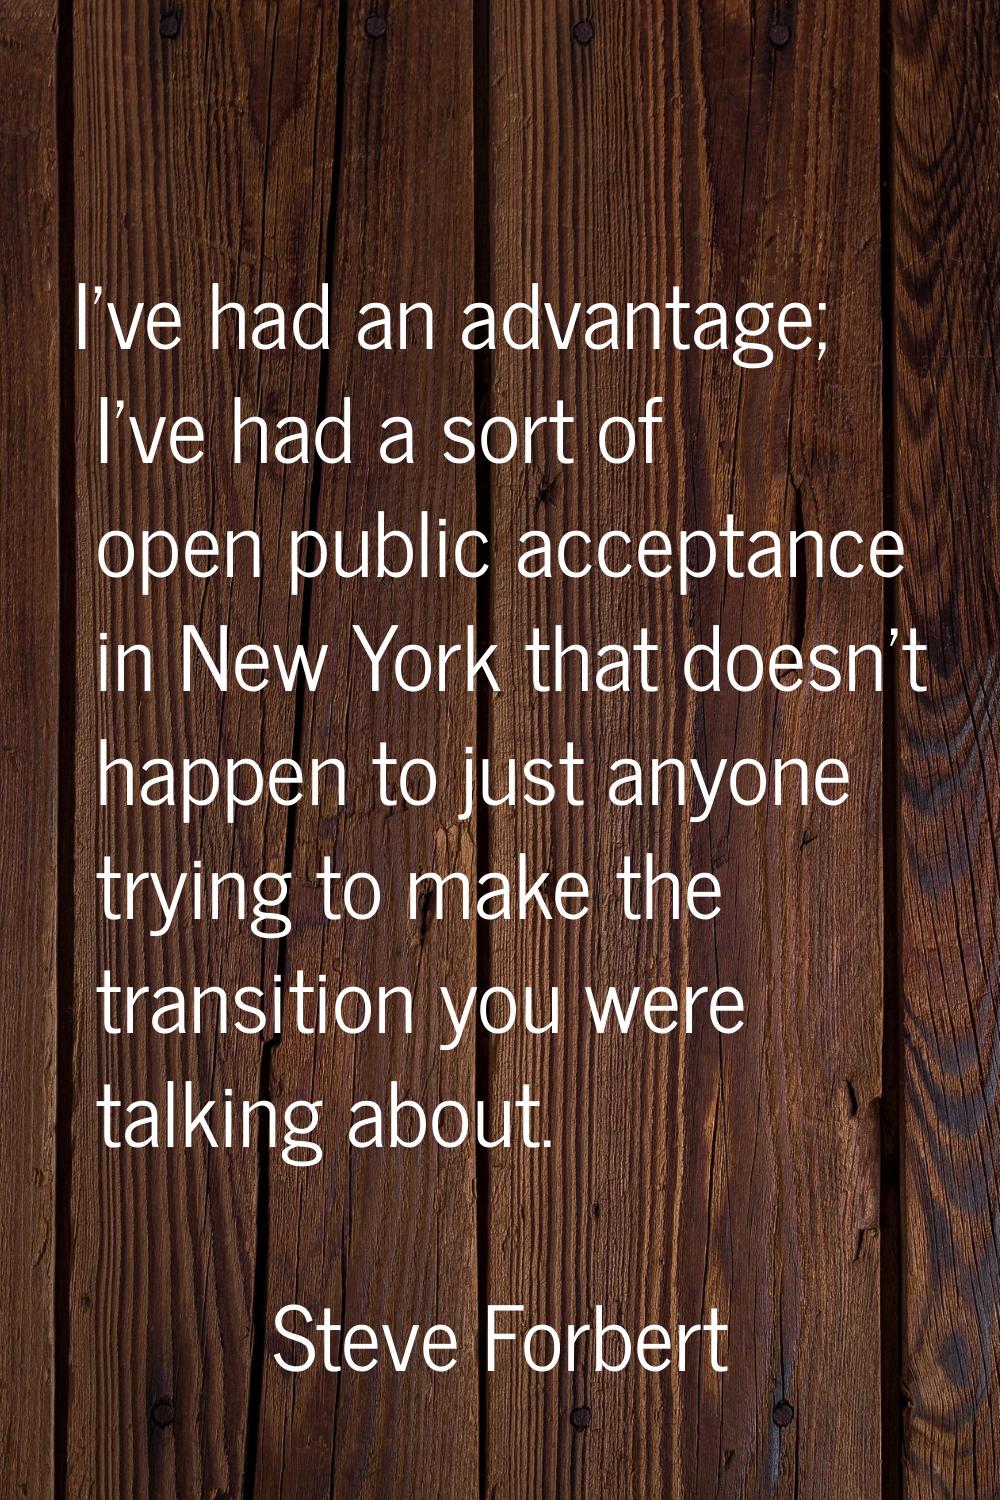 I've had an advantage; I've had a sort of open public acceptance in New York that doesn't happen to